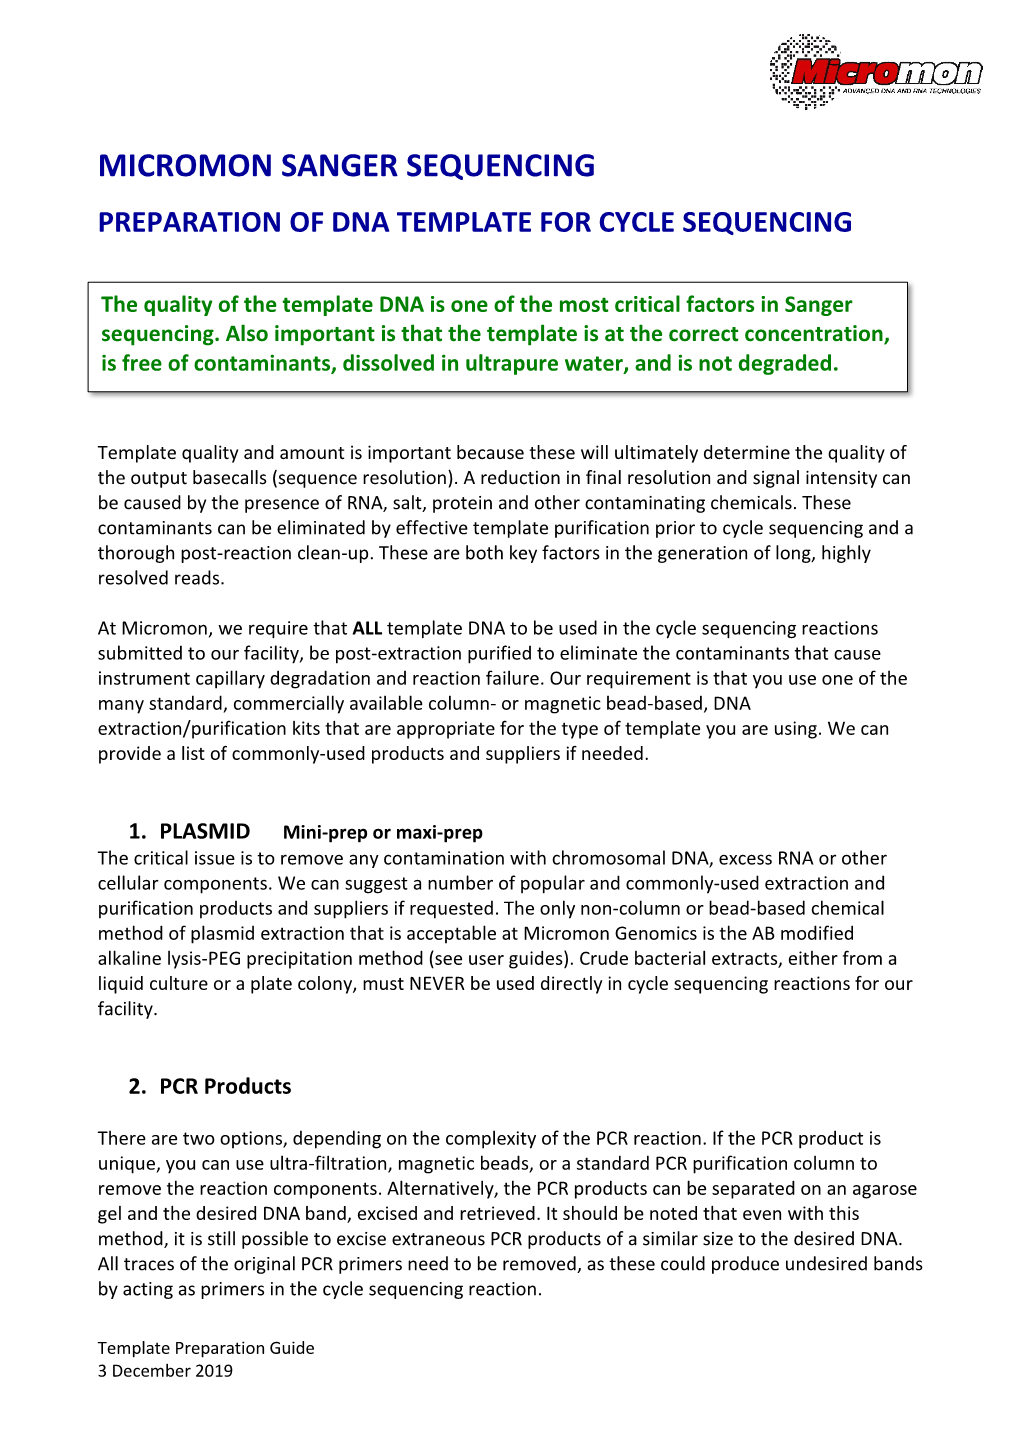 Guide for Preparing Purified Template DNA for Sanger Sequencing